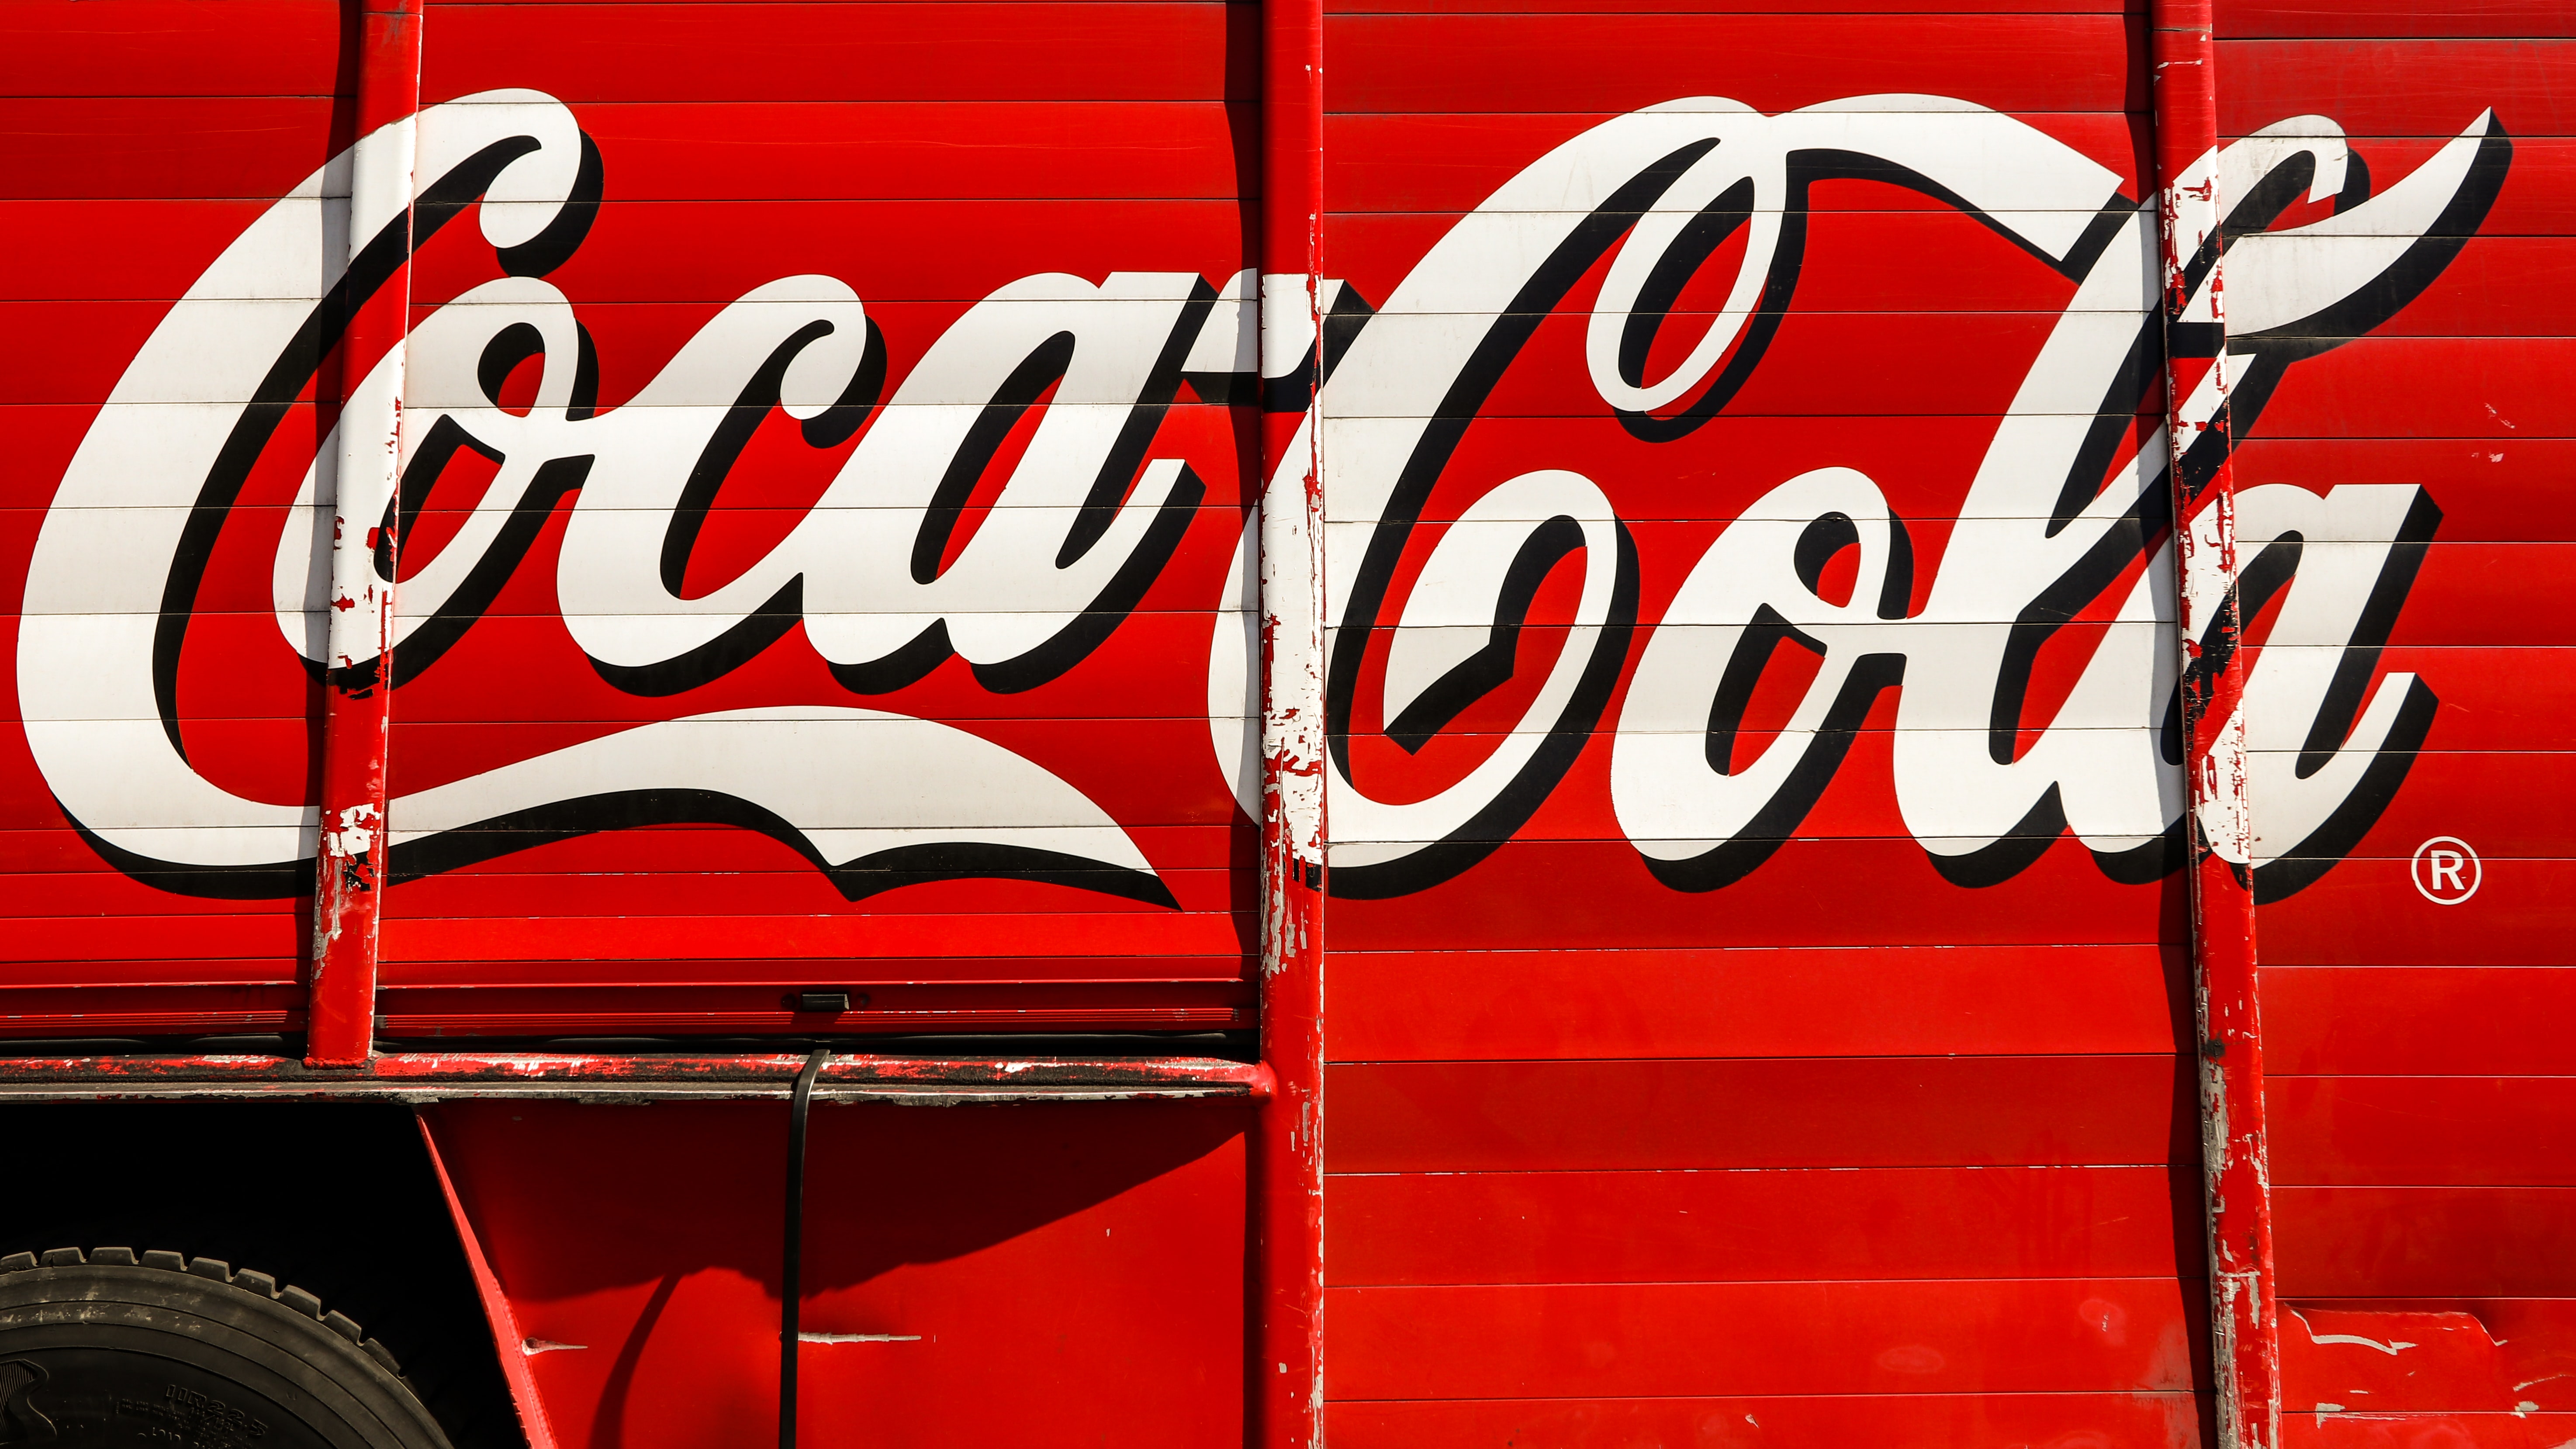 Sustainability initiatives at Coca-Cola Europacific Partners